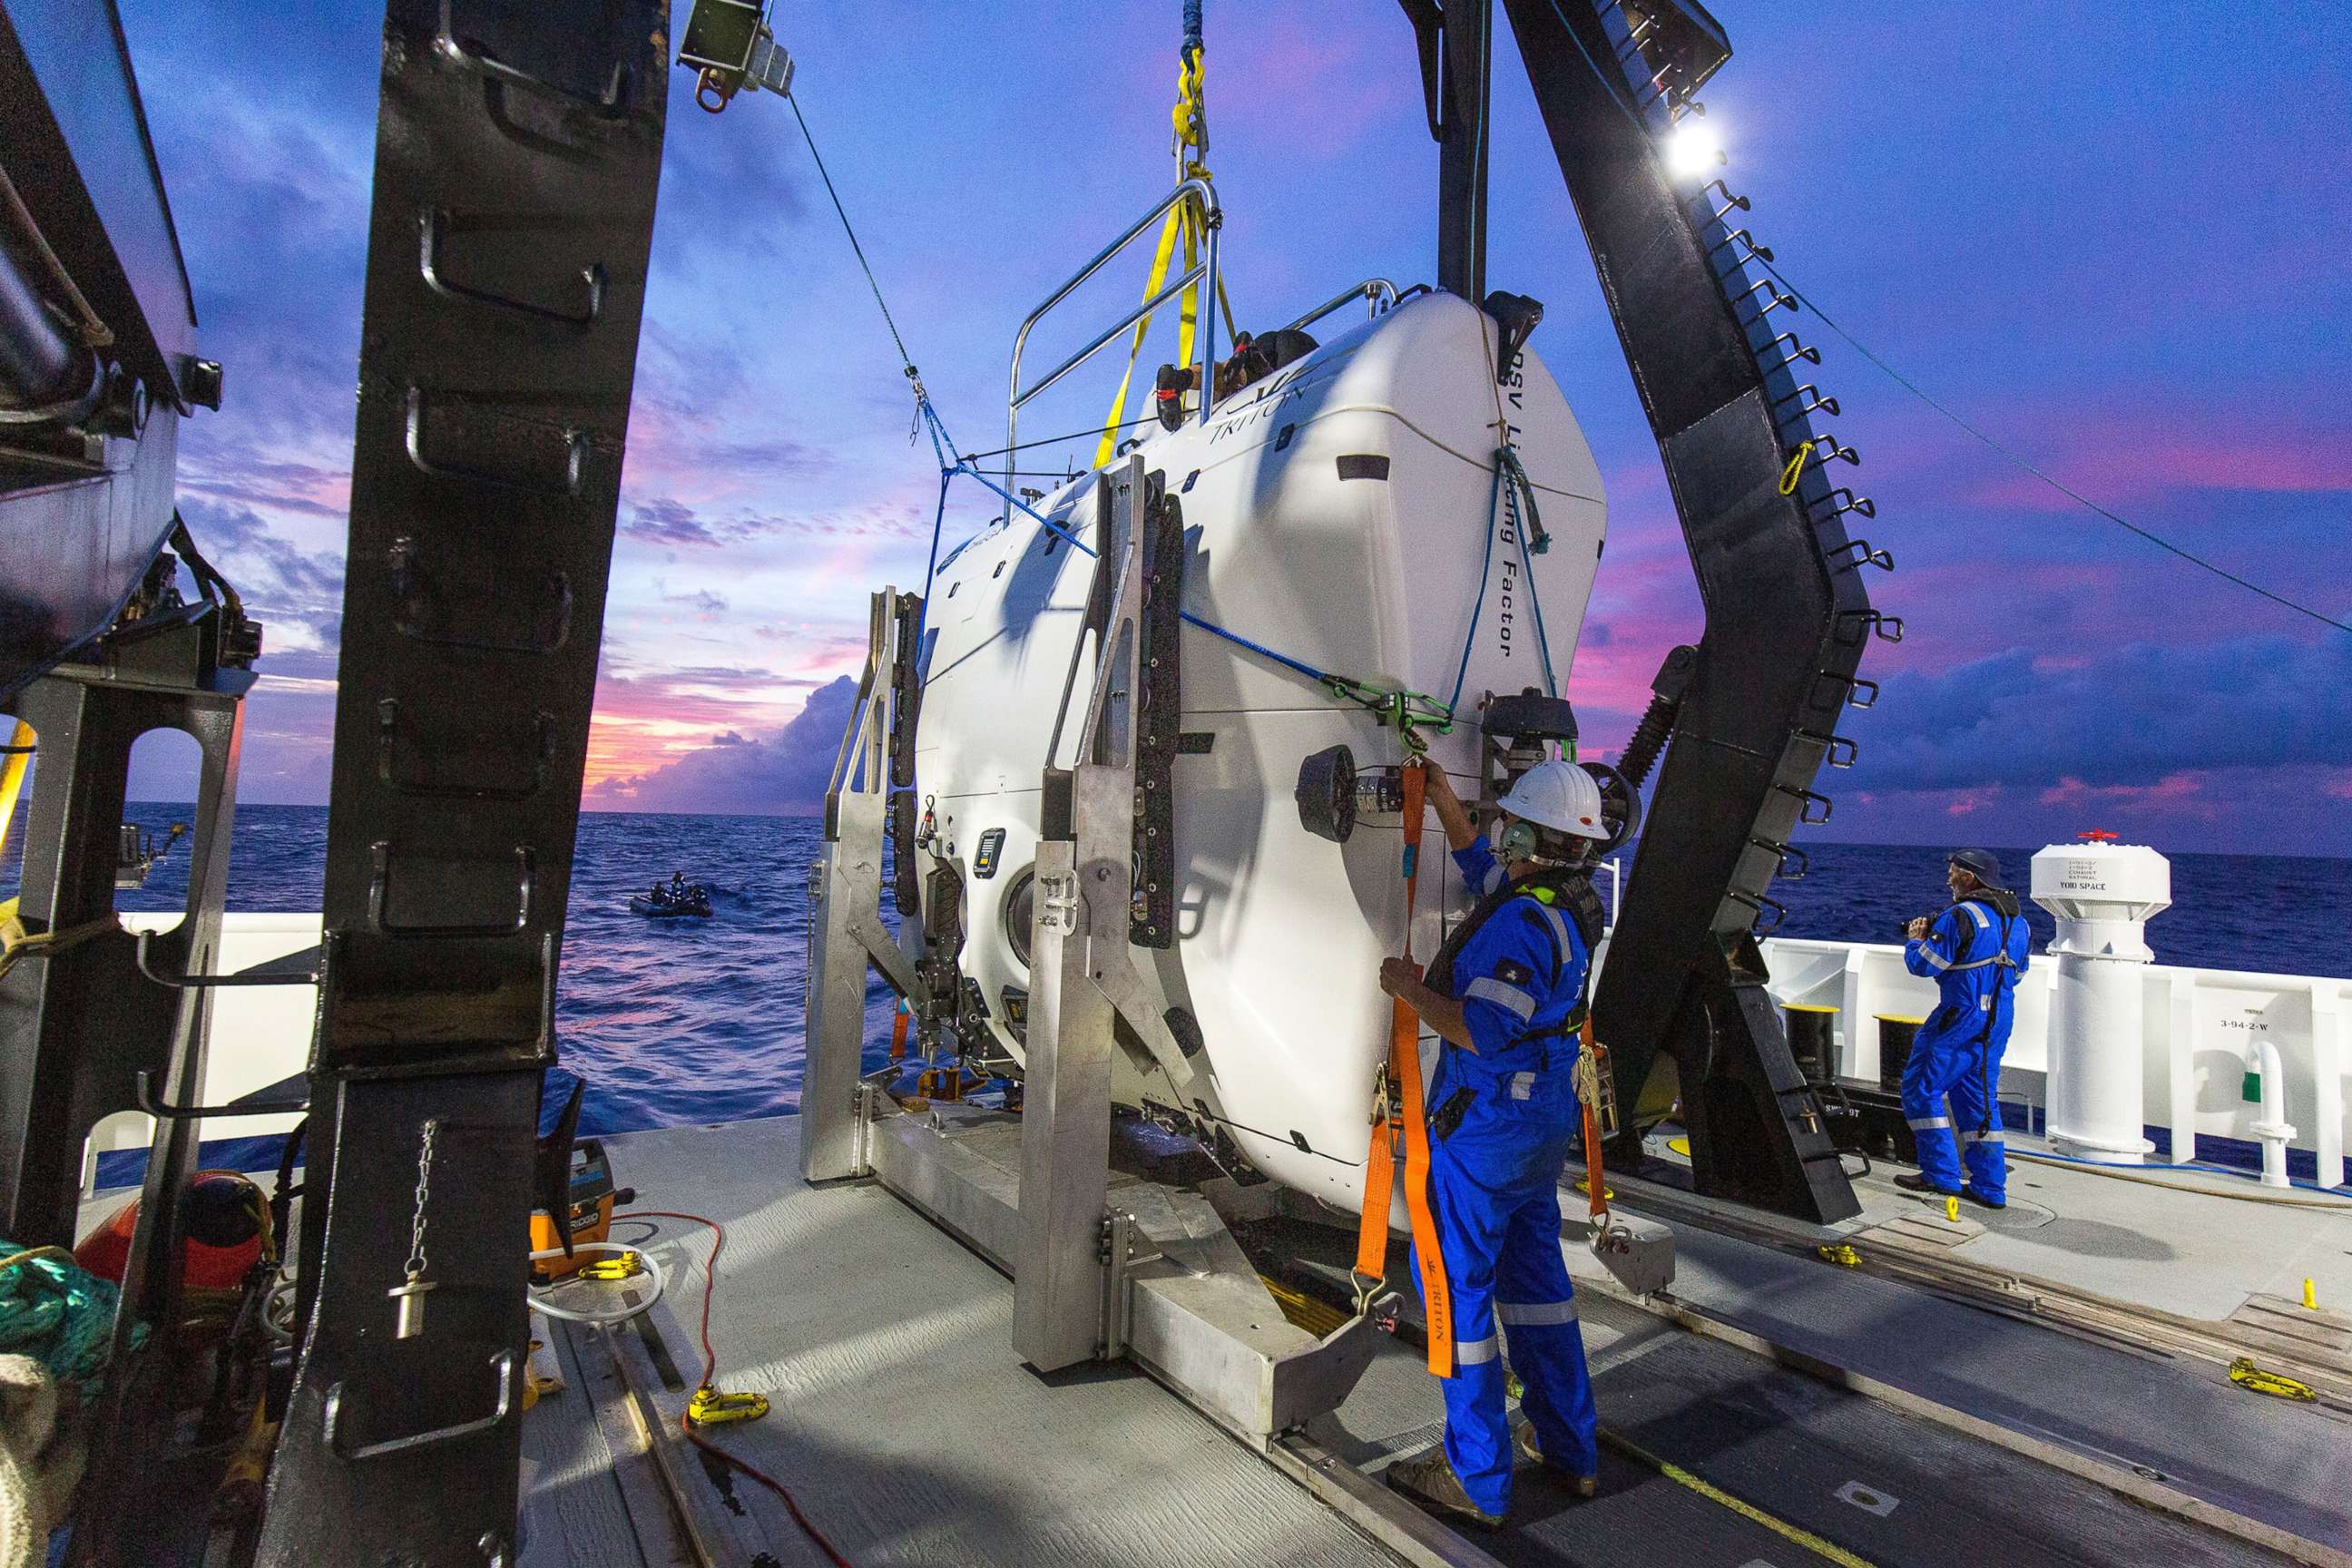 PHOTO: The submarine "Limiting Factor" is prepared at a drop point above the Mariana Trench.